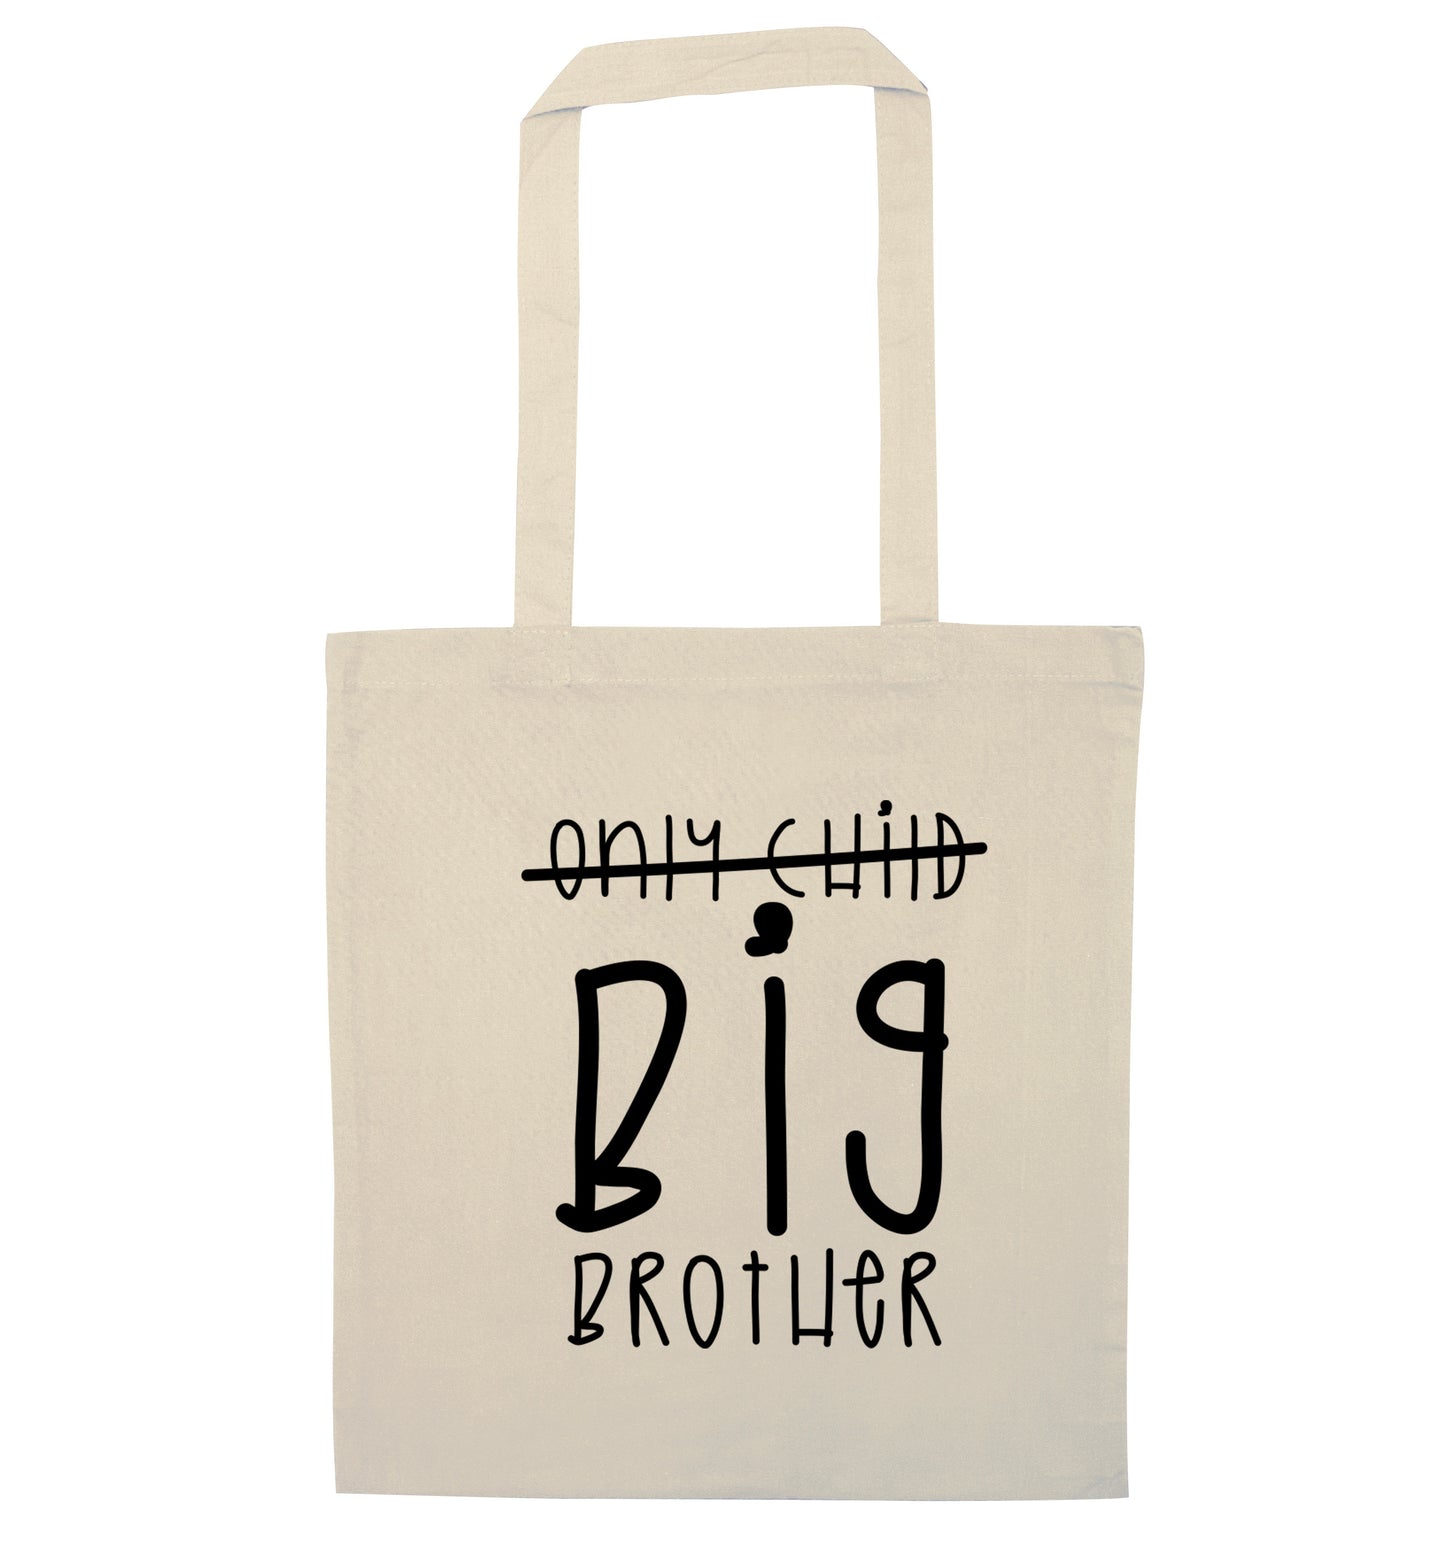 Only child big brother natural tote bag